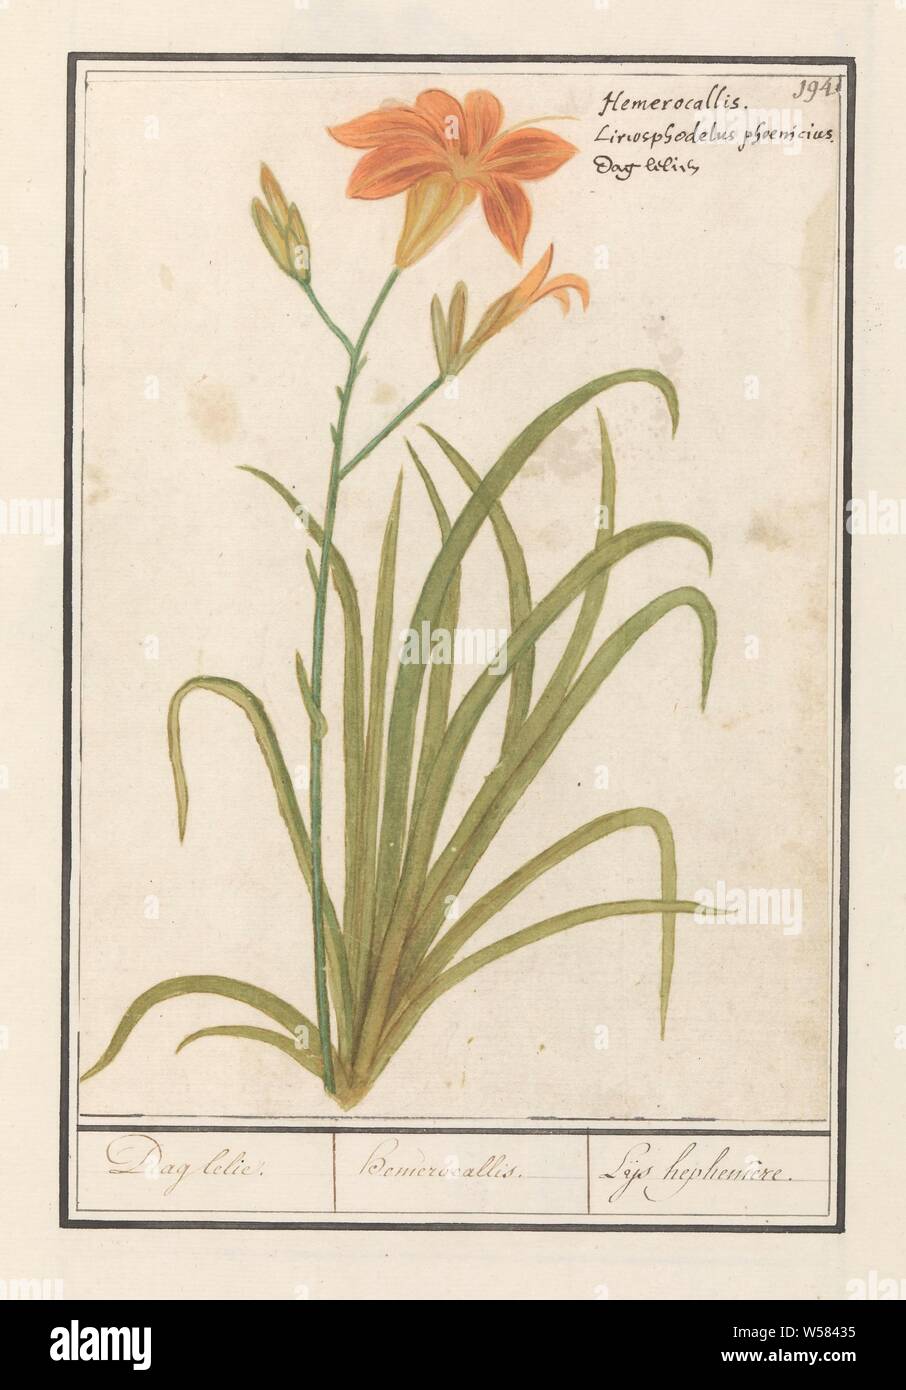 Orange day lily (Hemerocallis) Day lily. / hemerocallis. / Leys hephemere (title on object), Orange day lily. Numbered top right: 194. Top right the Latin and Dutch name. Part of the second album with drawings of flowers and plants. Ninth of twelve albums with drawings of animals, birds and plants known around 1600, commissioned by Emperor Rudolf II. With explanations in Dutch, Latin and French., Flowers: lily, Anselmus Boetius de Boodt, 1596 - 1610, paper, watercolor (paint), deck paint, chalk, ink, pen, h 255 mm × w 184 mm Stock Photo